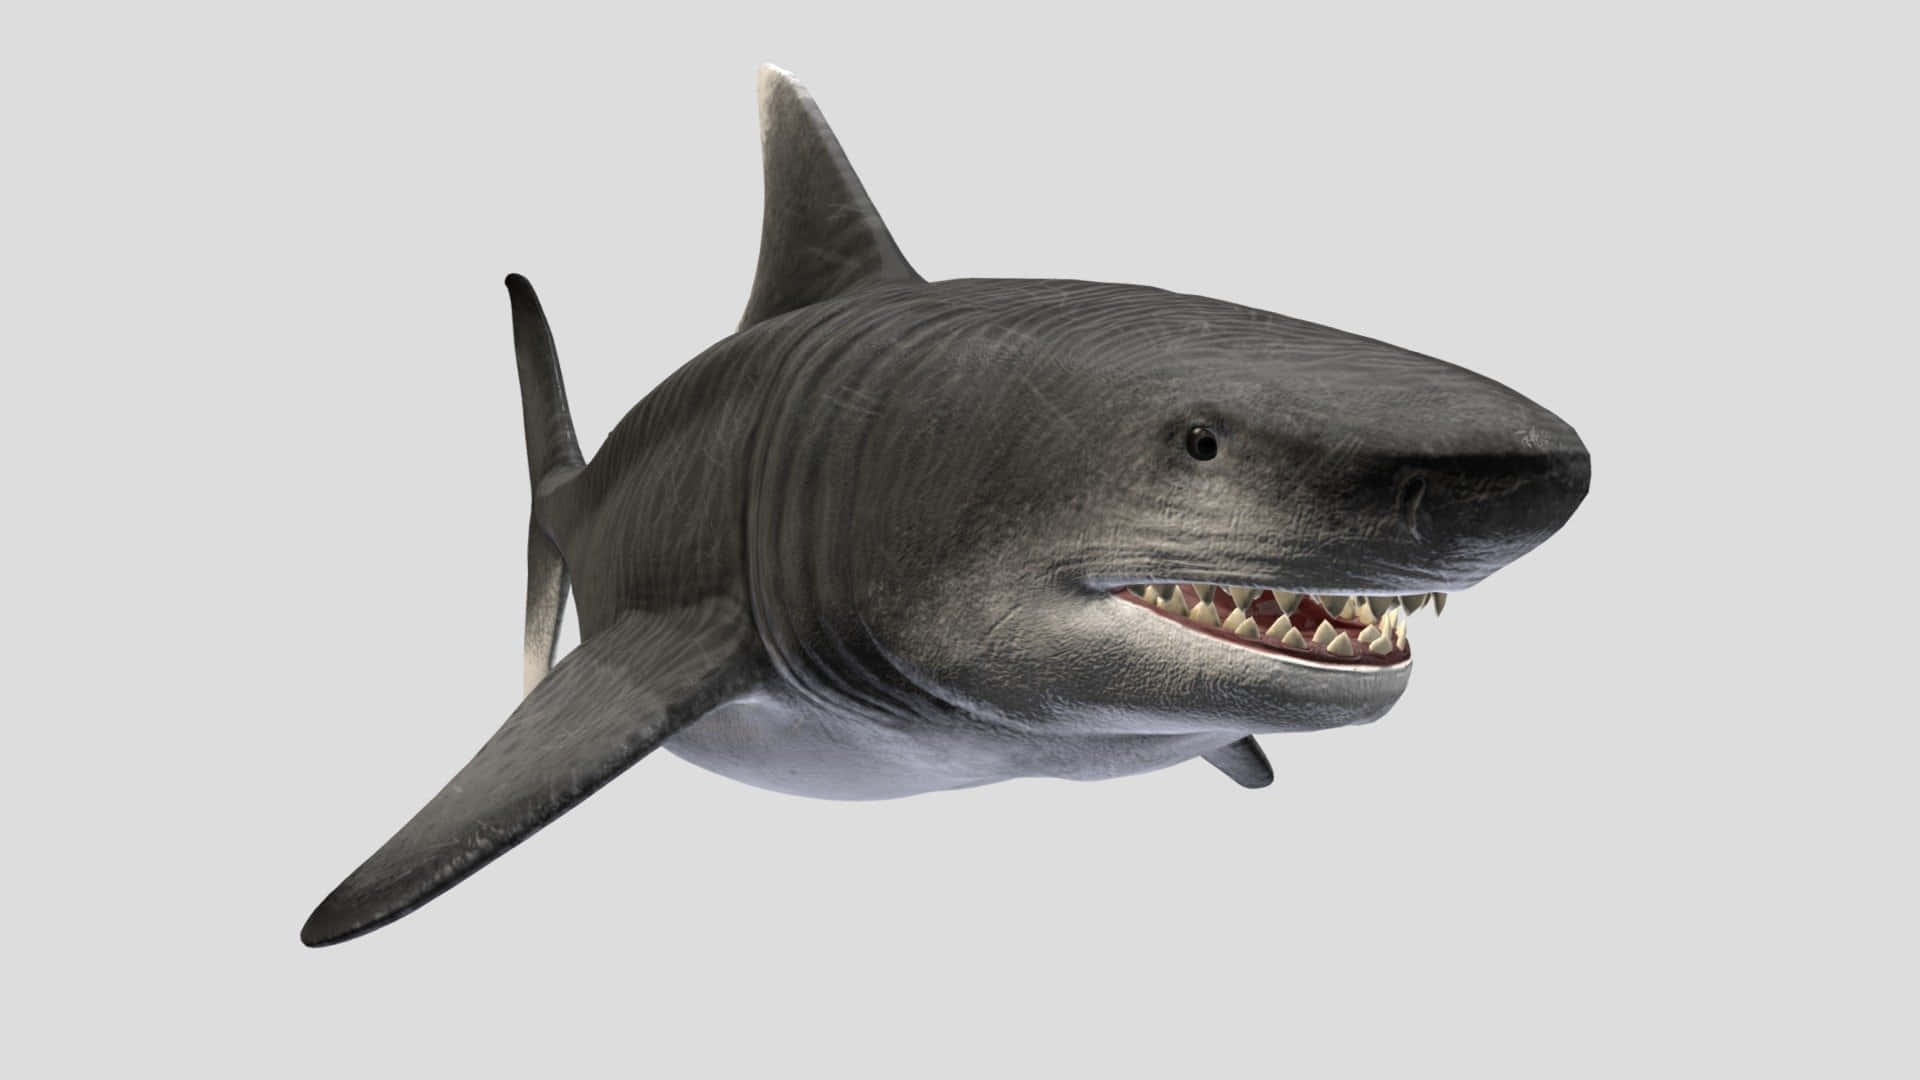 a shark with its mouth open is shown